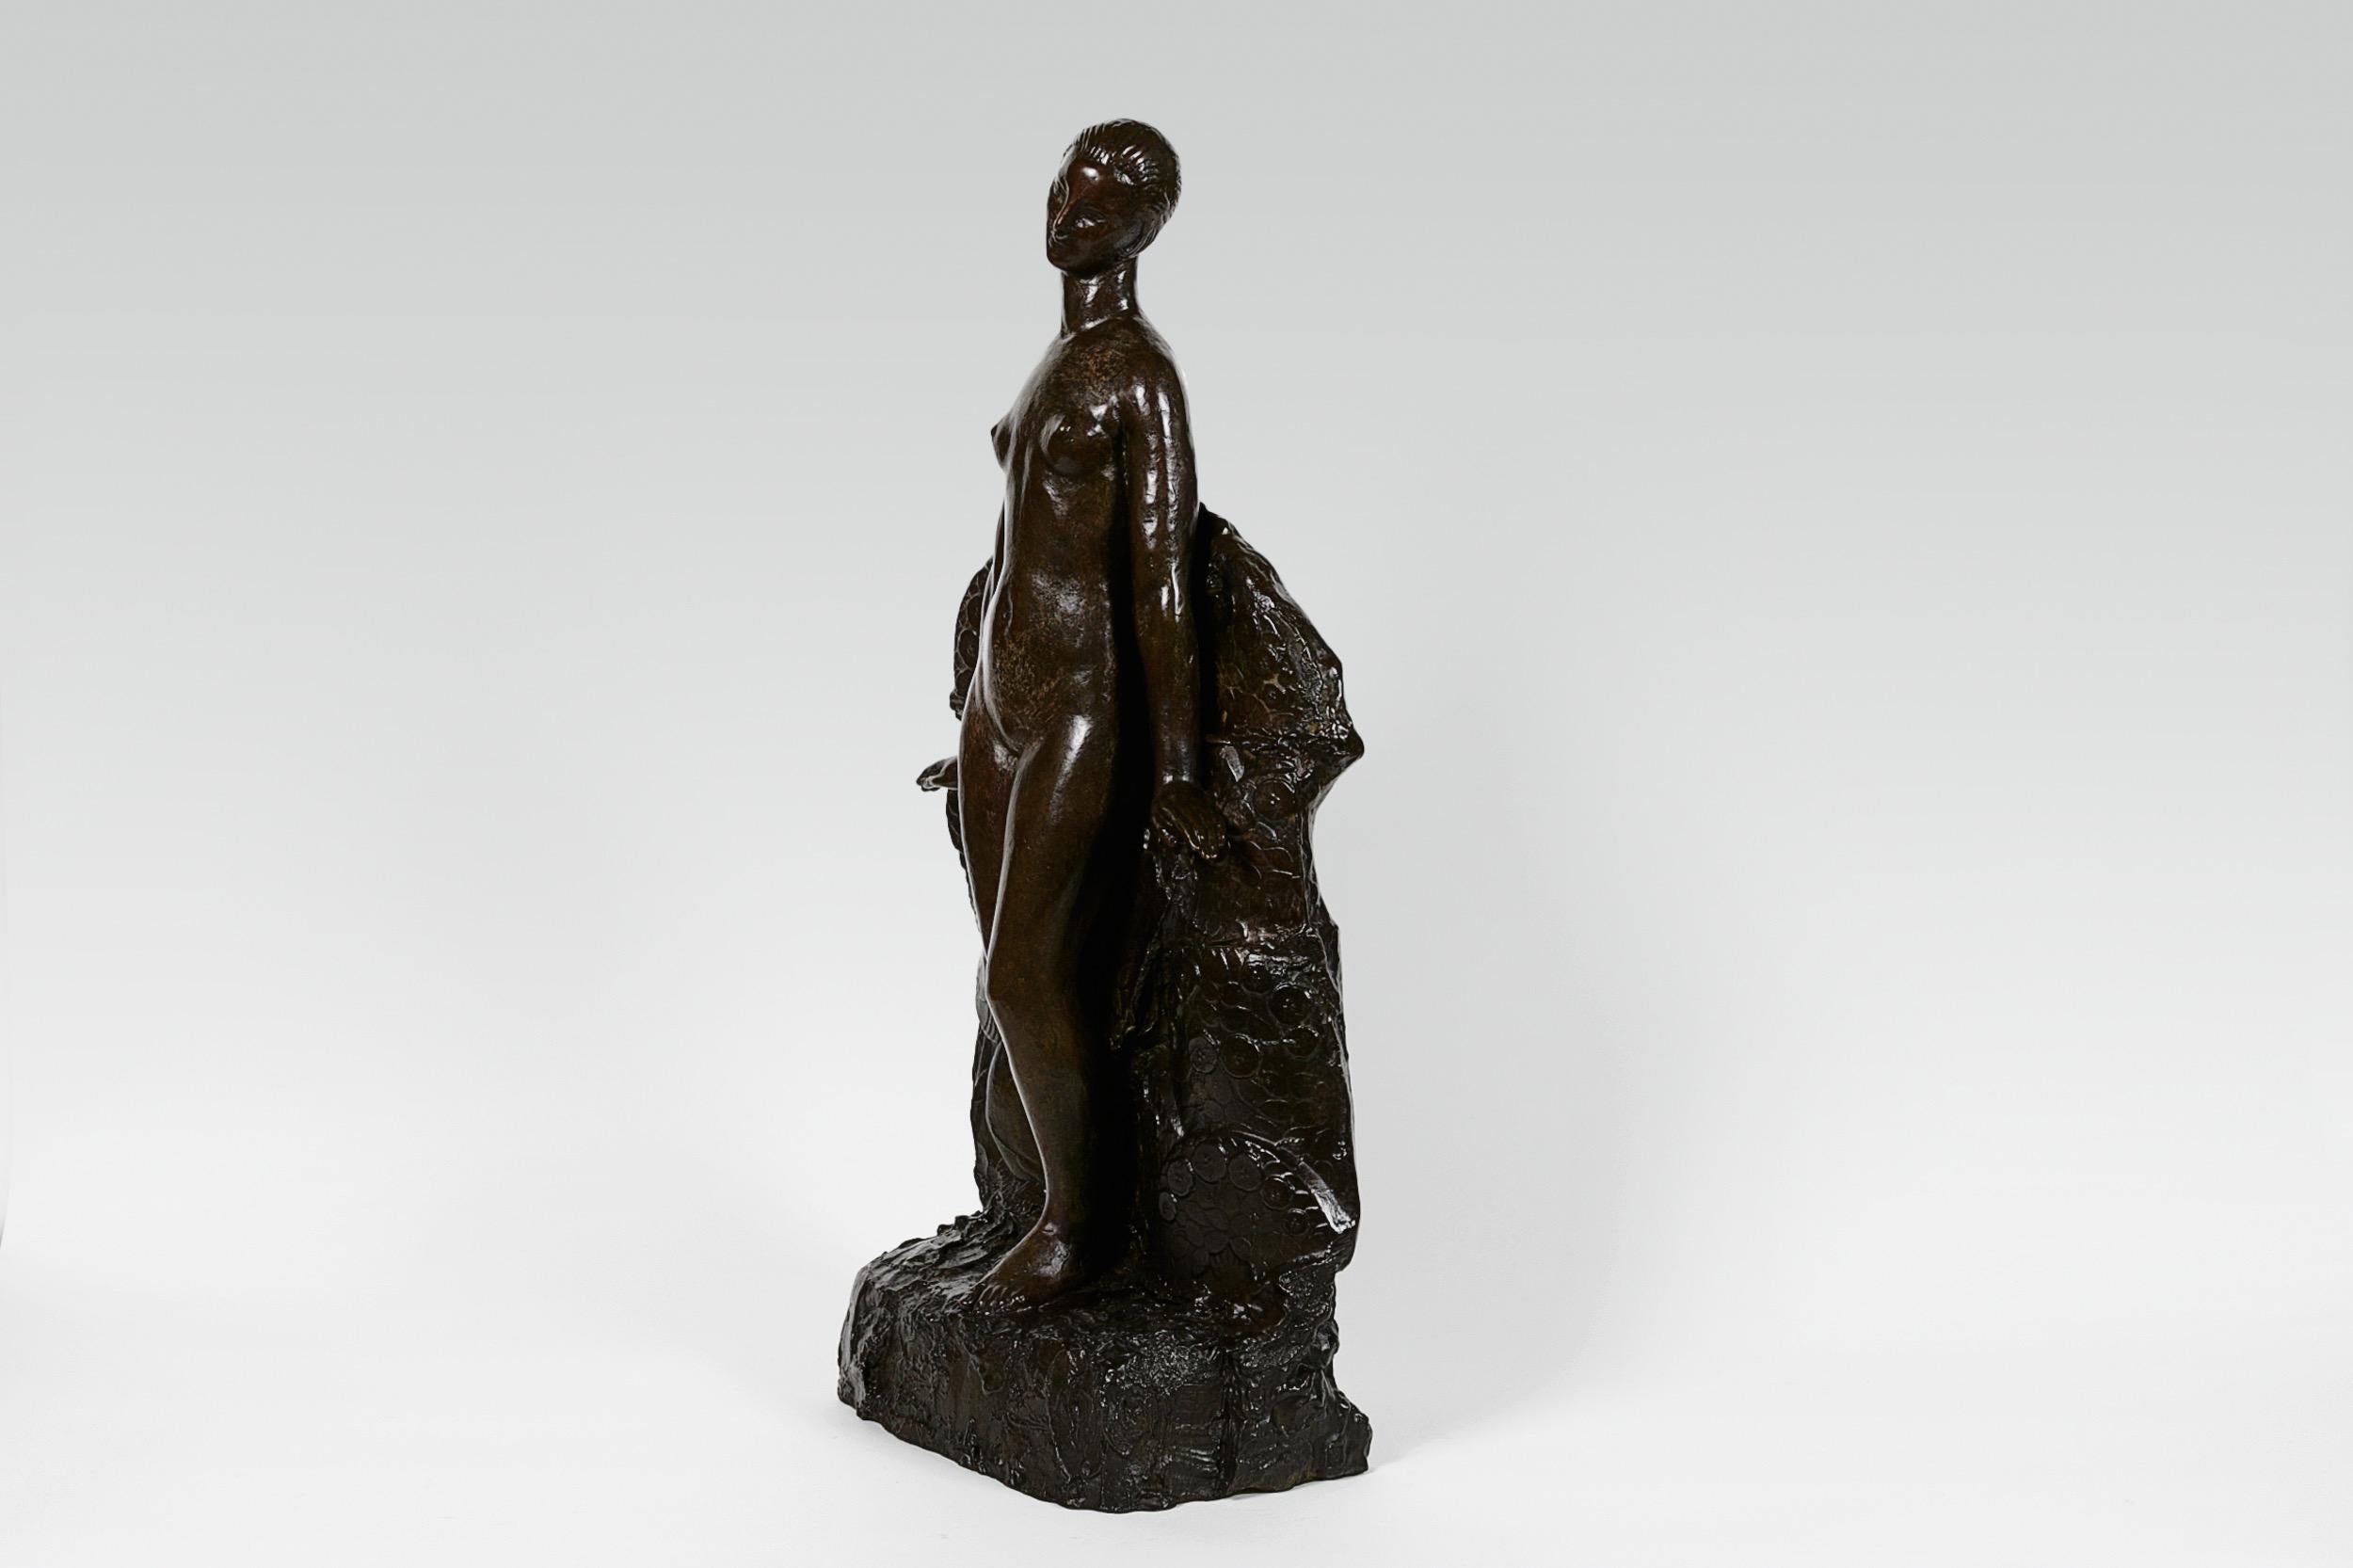 Bronze Art Deco sculpture “Femme aux Colombes” by Henri Louis Bouchard (1875-1960) depicting a young woman standing before a composition of flowers and two doves. Signed, H Bouchard. Monogrammed and stamped, “Fonderie de la Plaine”. Numbered, 1/8.